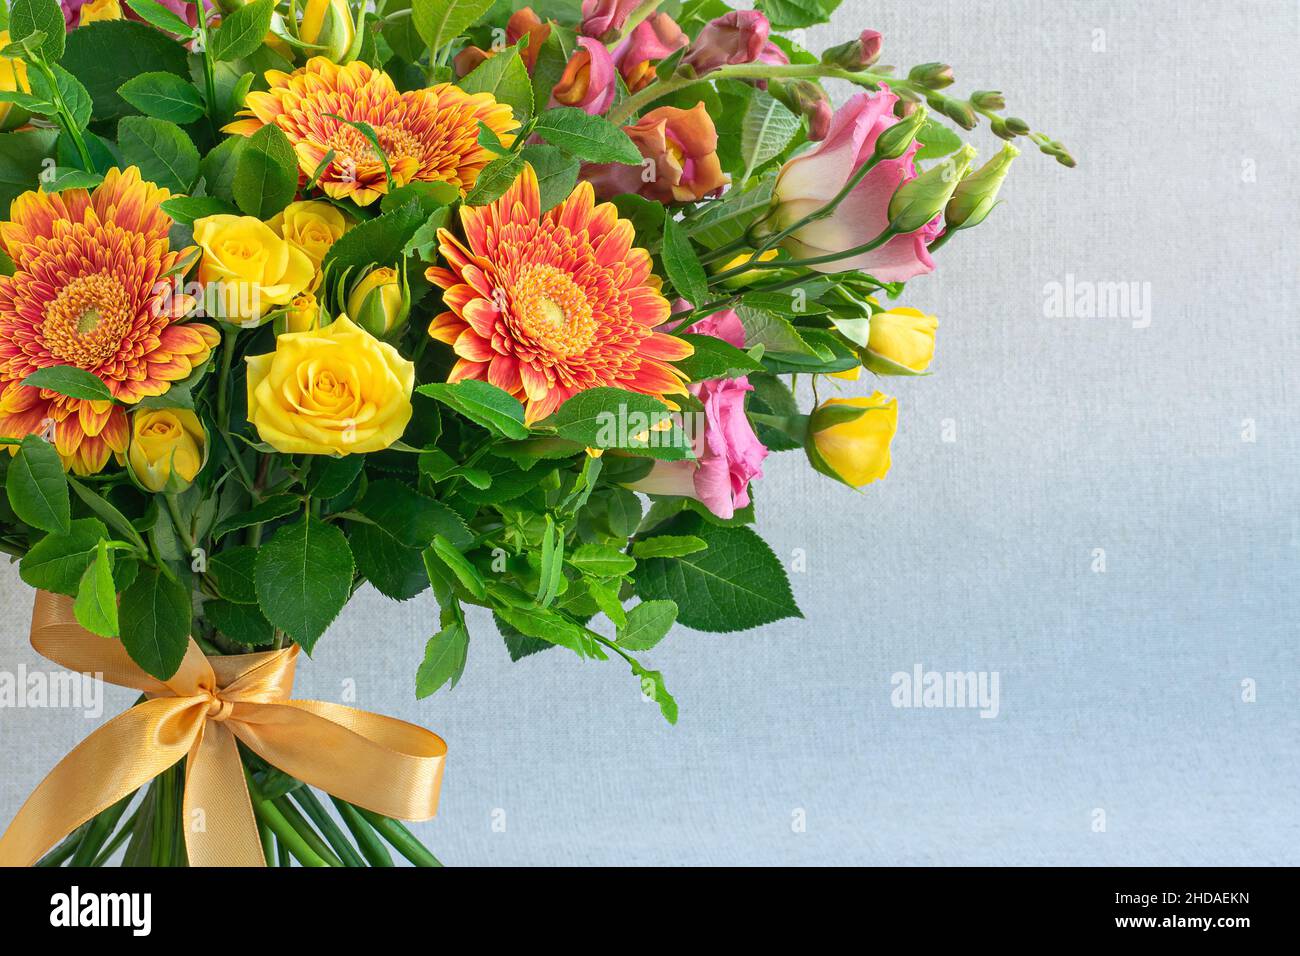 Floral arrangement with gerberas and roses on light background Stock Photo